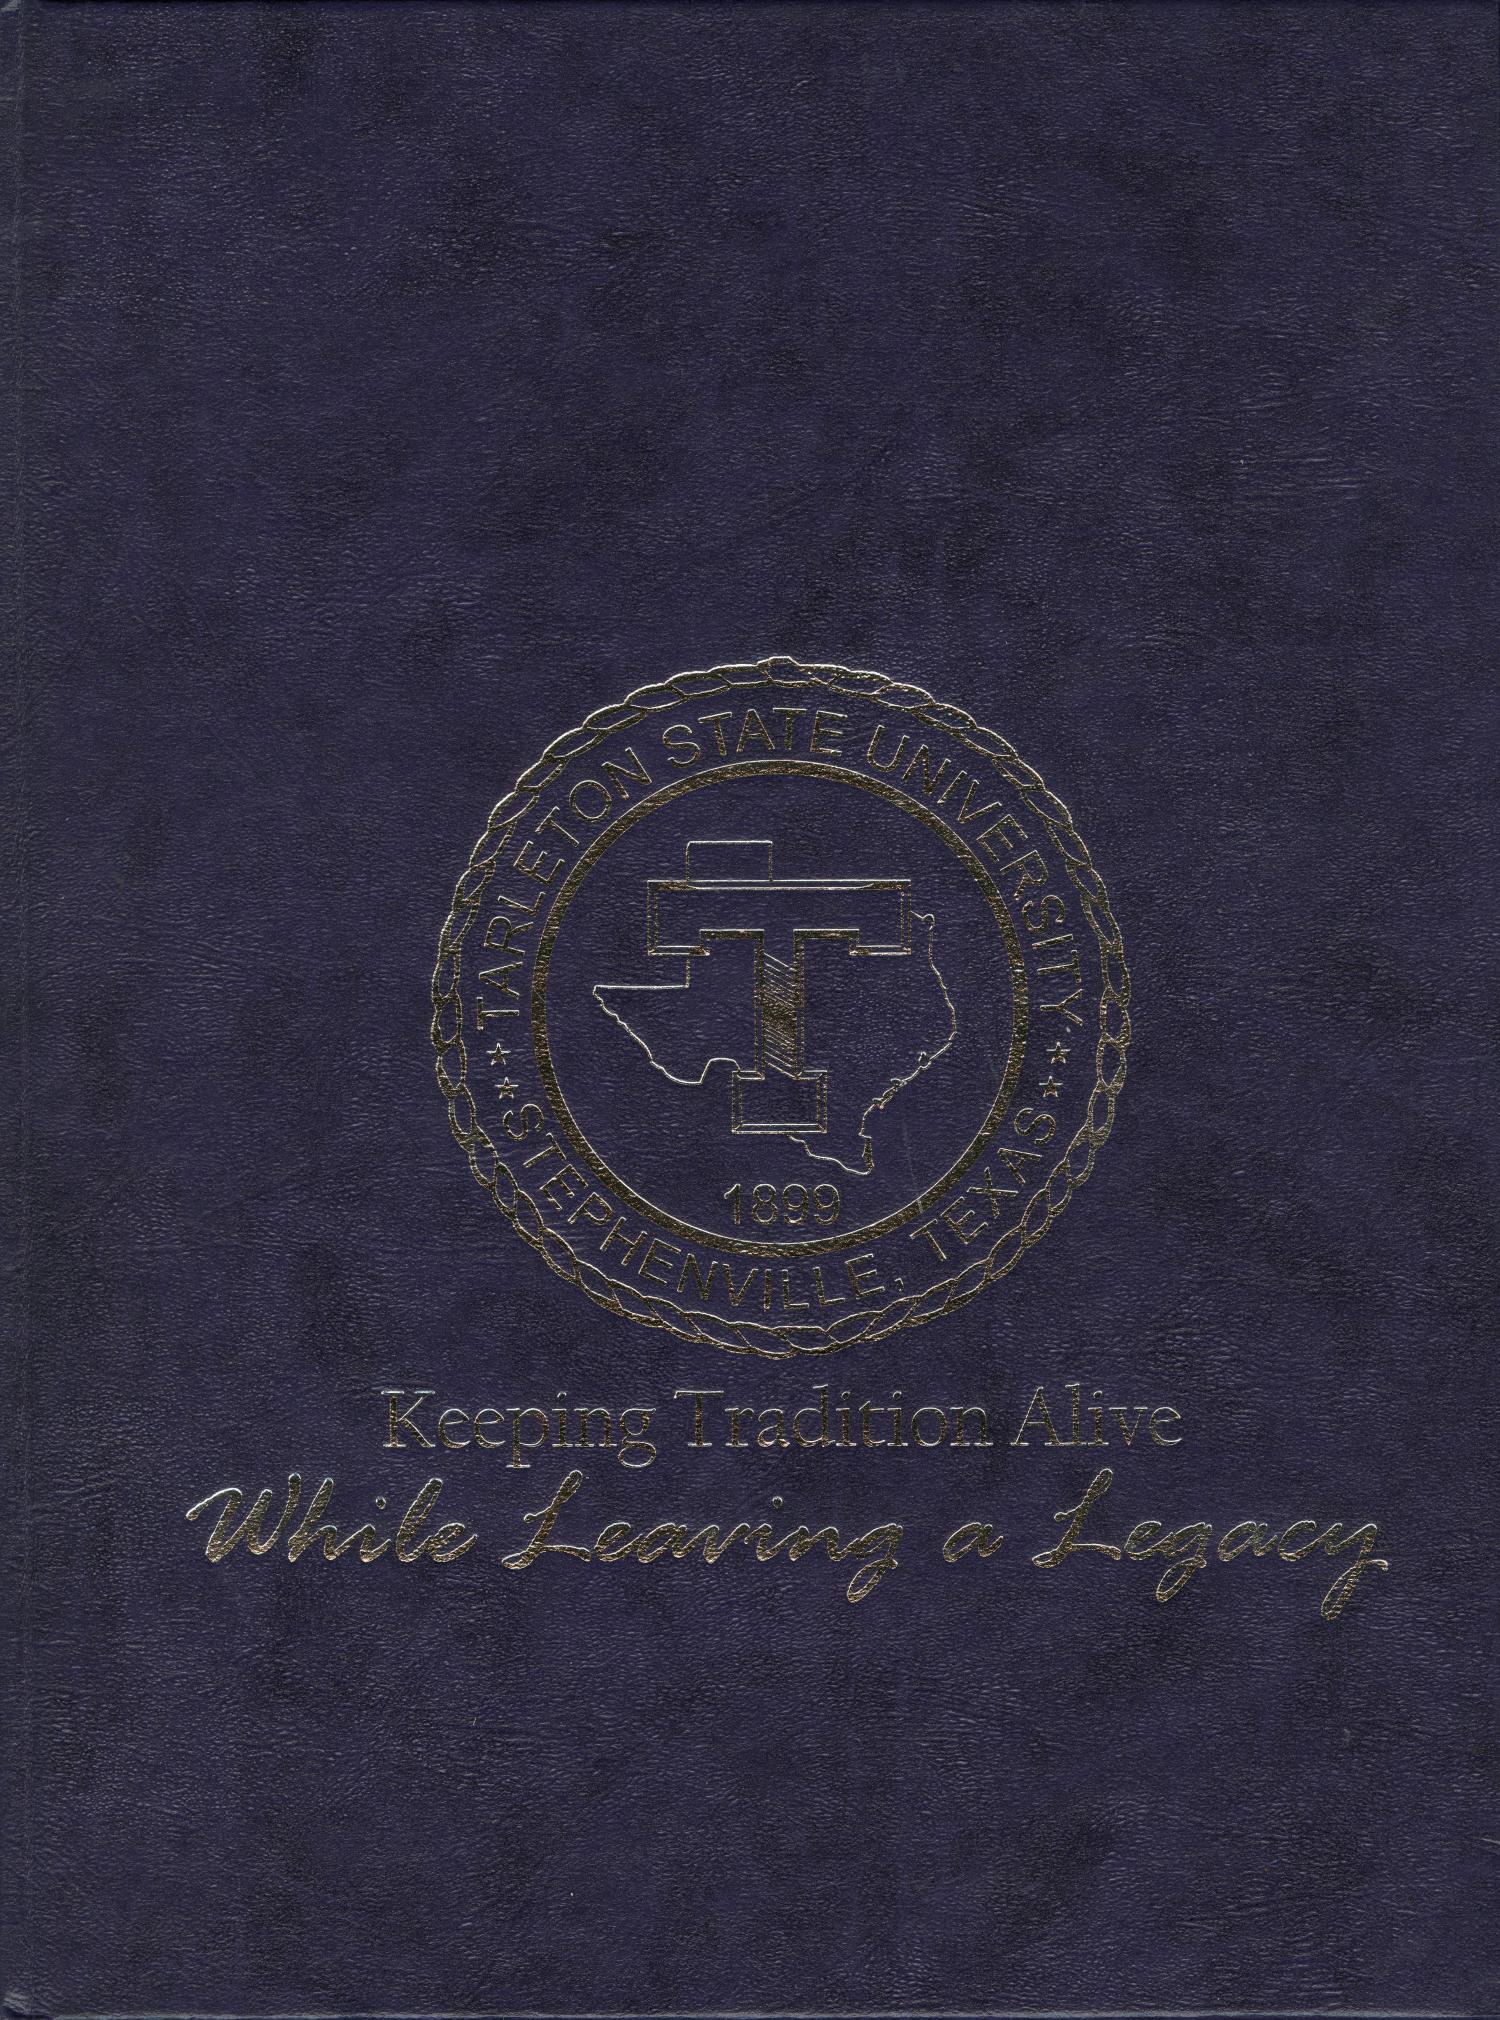 The Grassburr, Yearbook of Tarleton State University, 2006
                                                
                                                    Front Cover
                                                